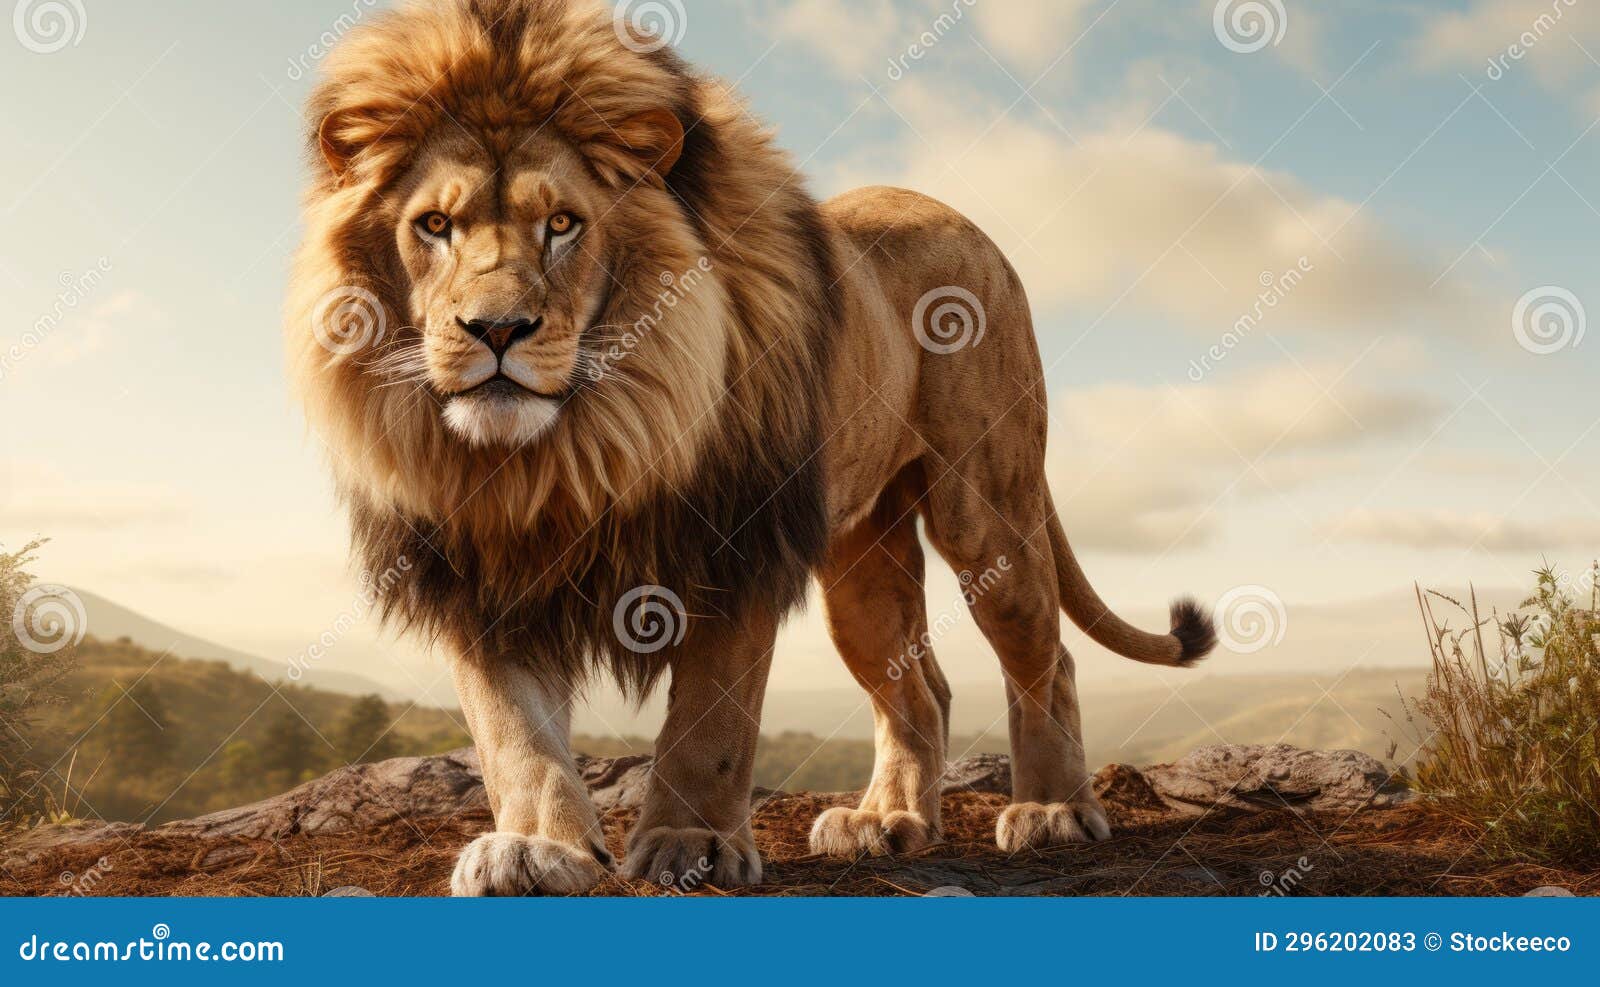 fantastic lion: a majestic creature standing alone on a mountain edge